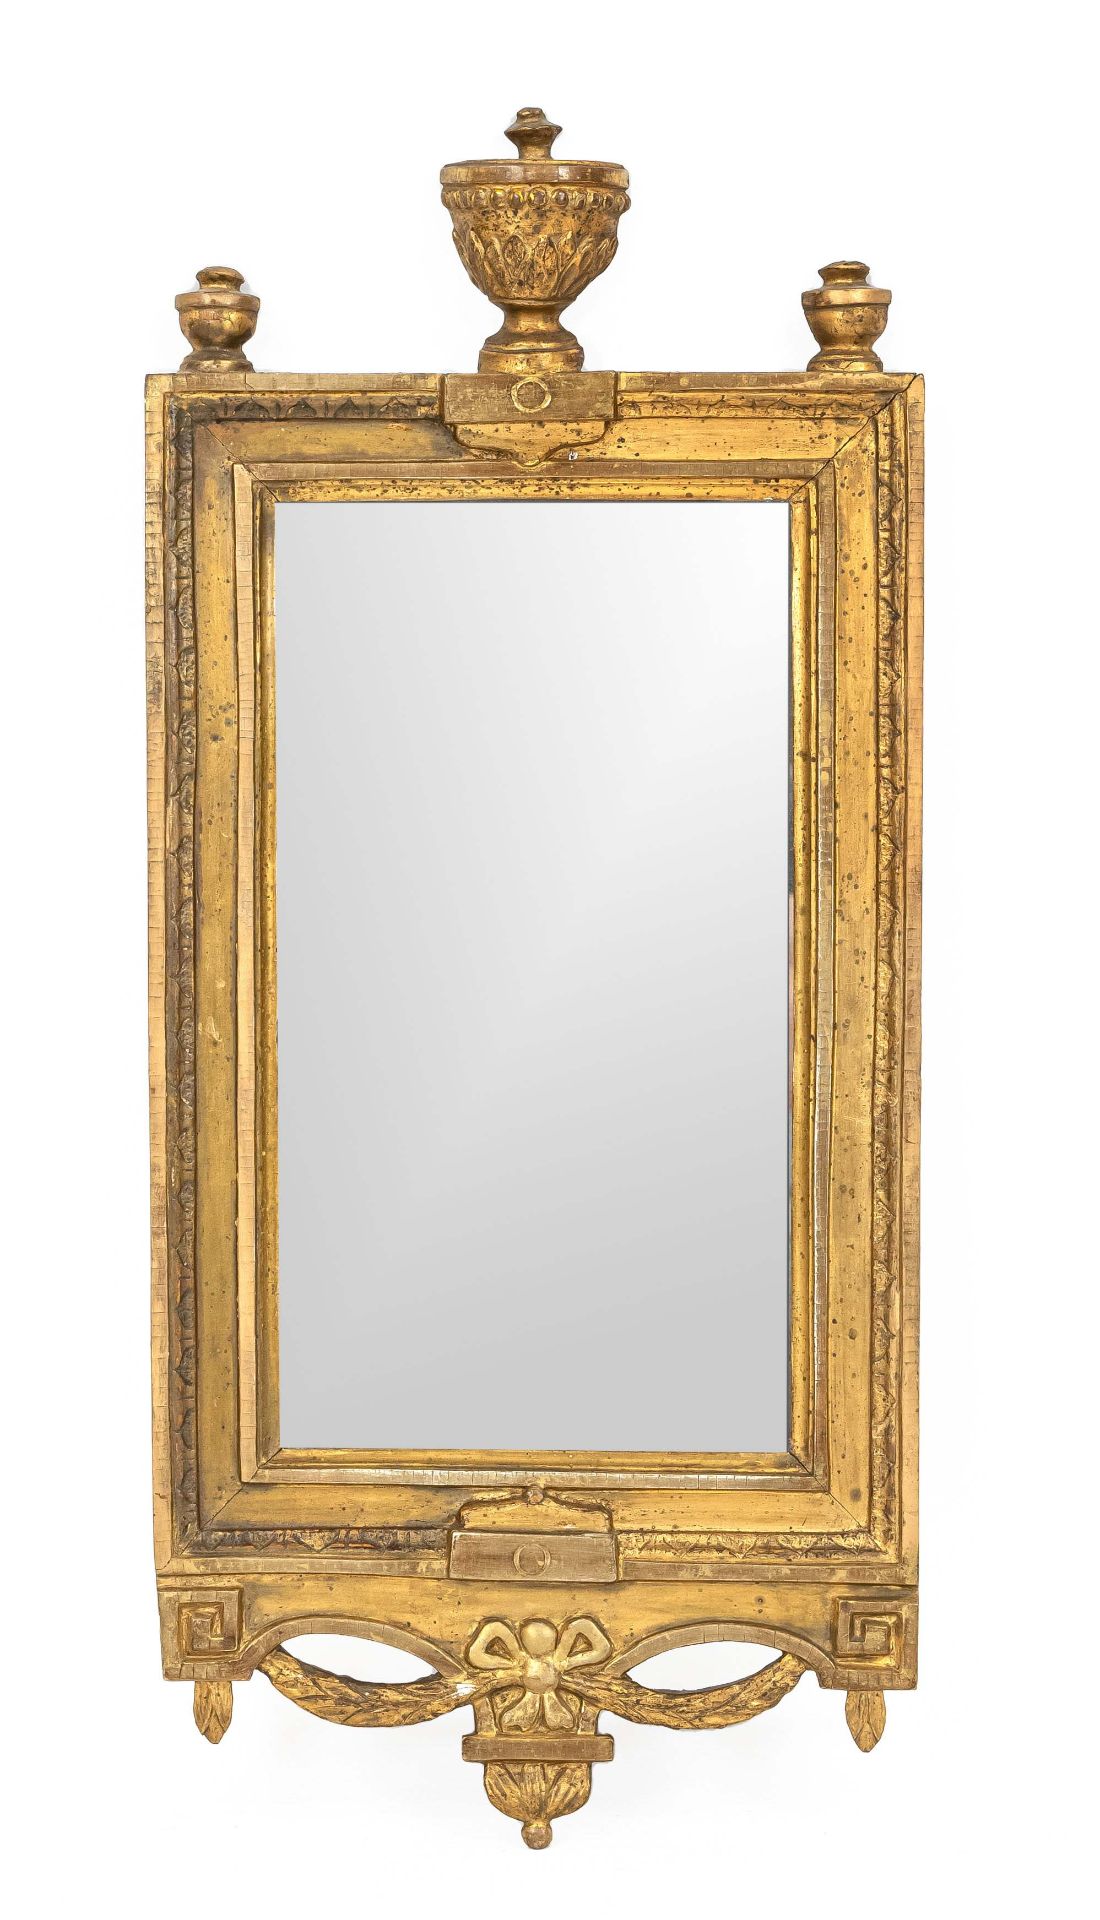 Louis-Seize wall mirror around 1790, carved and gilded wooden frame, 70 x 31 cm